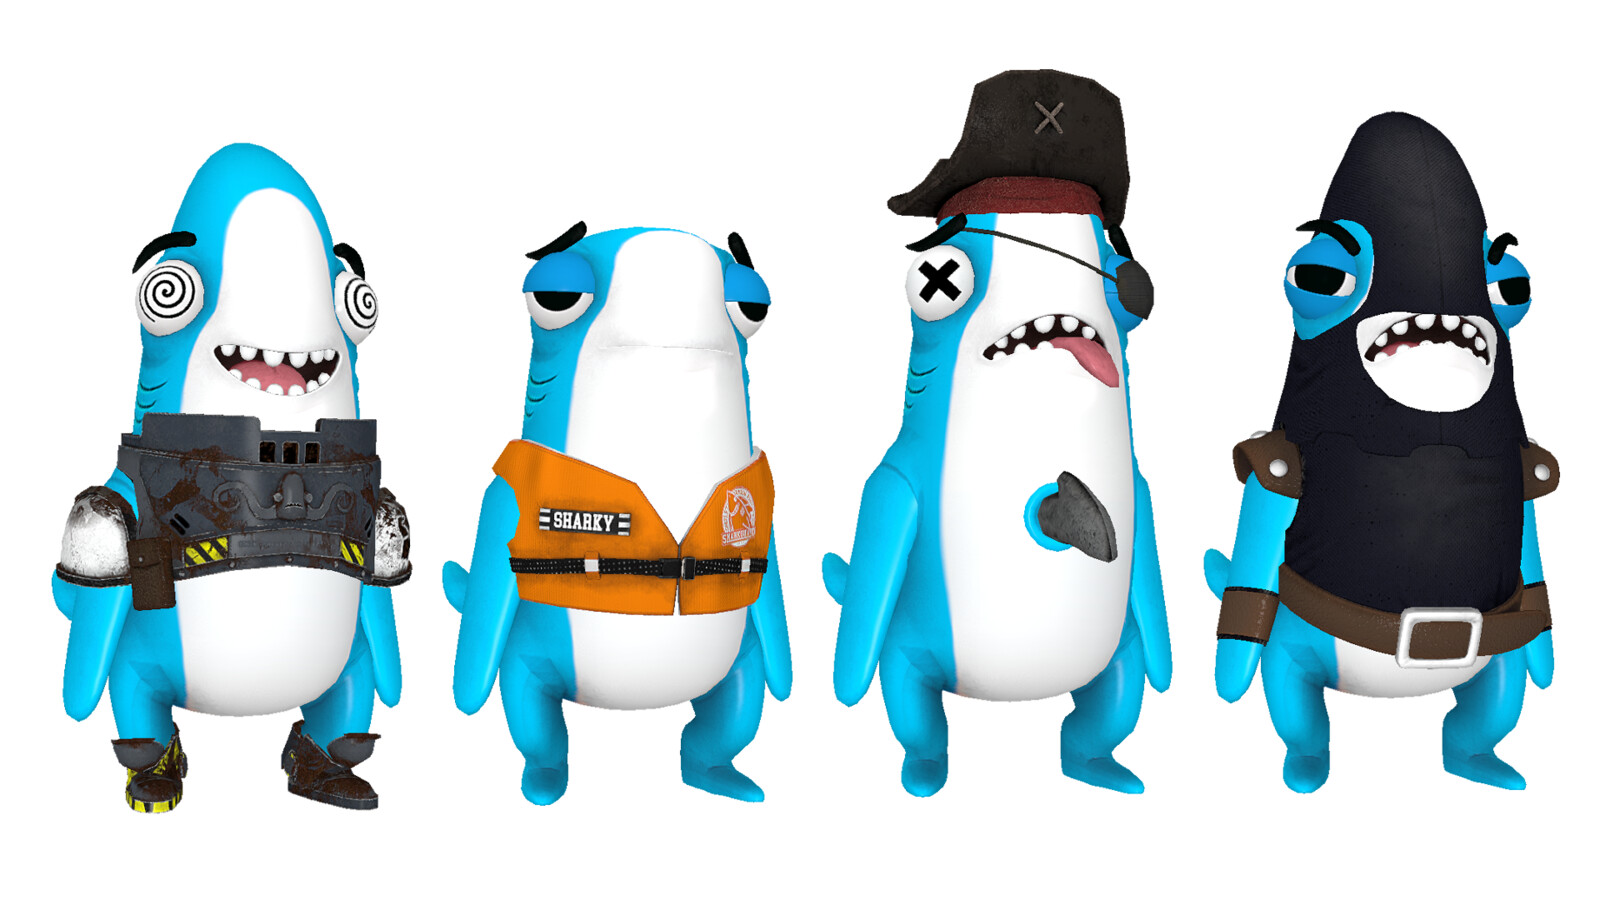 Sharky was the first character I added customization to, in the form of various mix-and-match outfits. He has several combinations of facial expressions and outfits available for the player to choose.